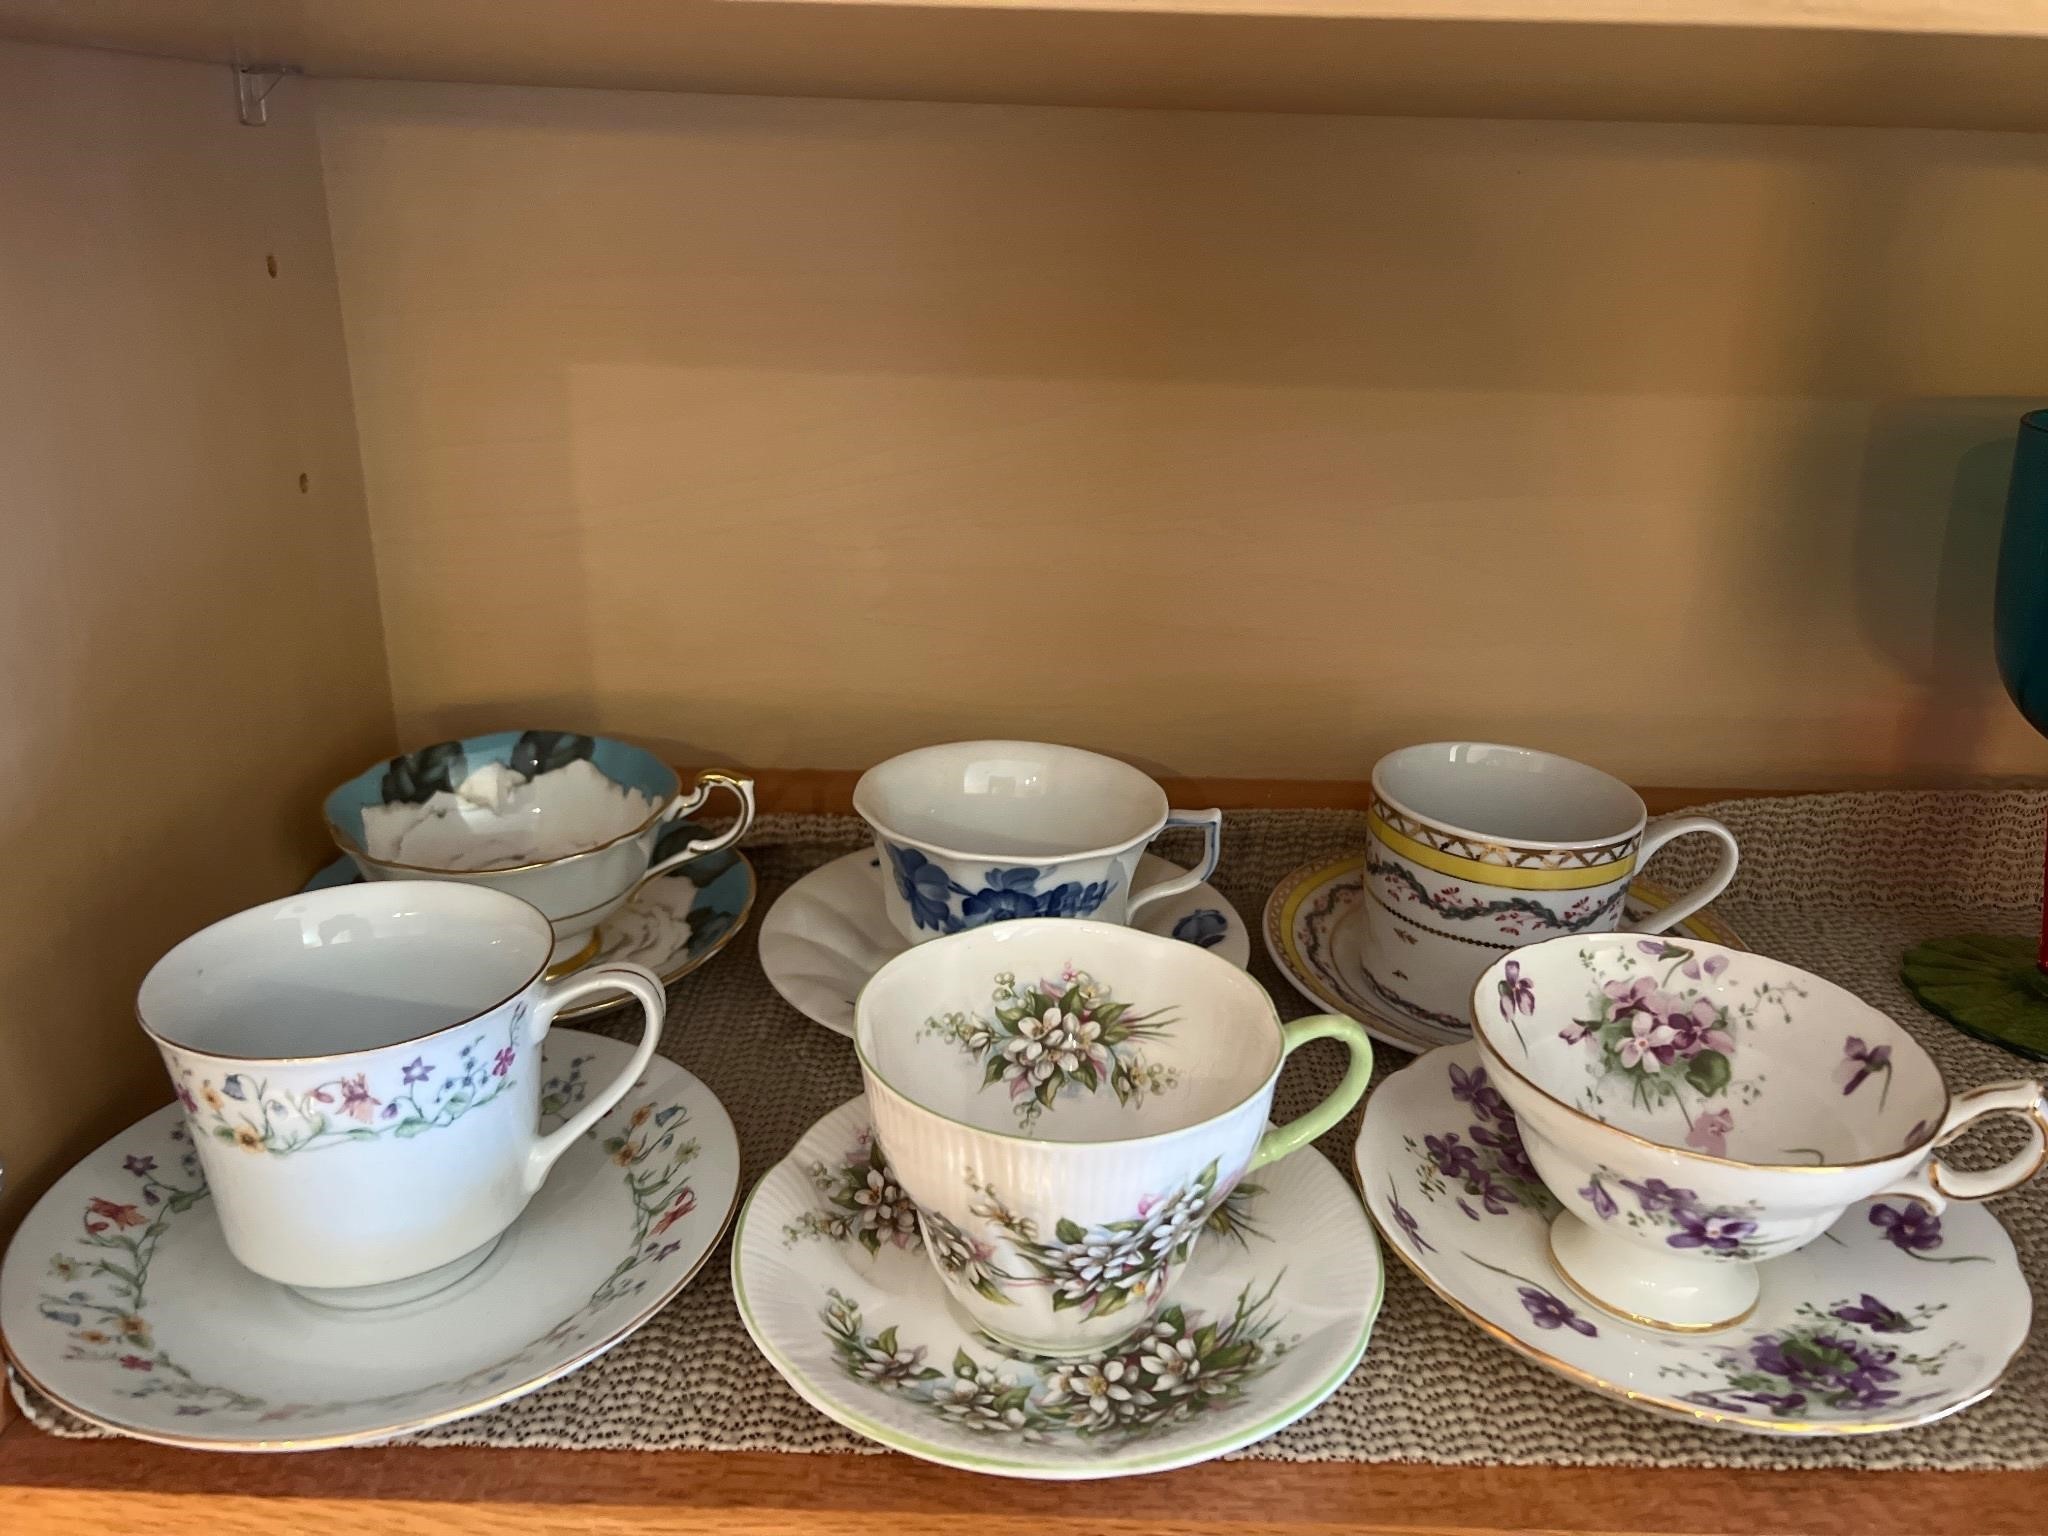 Assorted Teacup and saucer sets